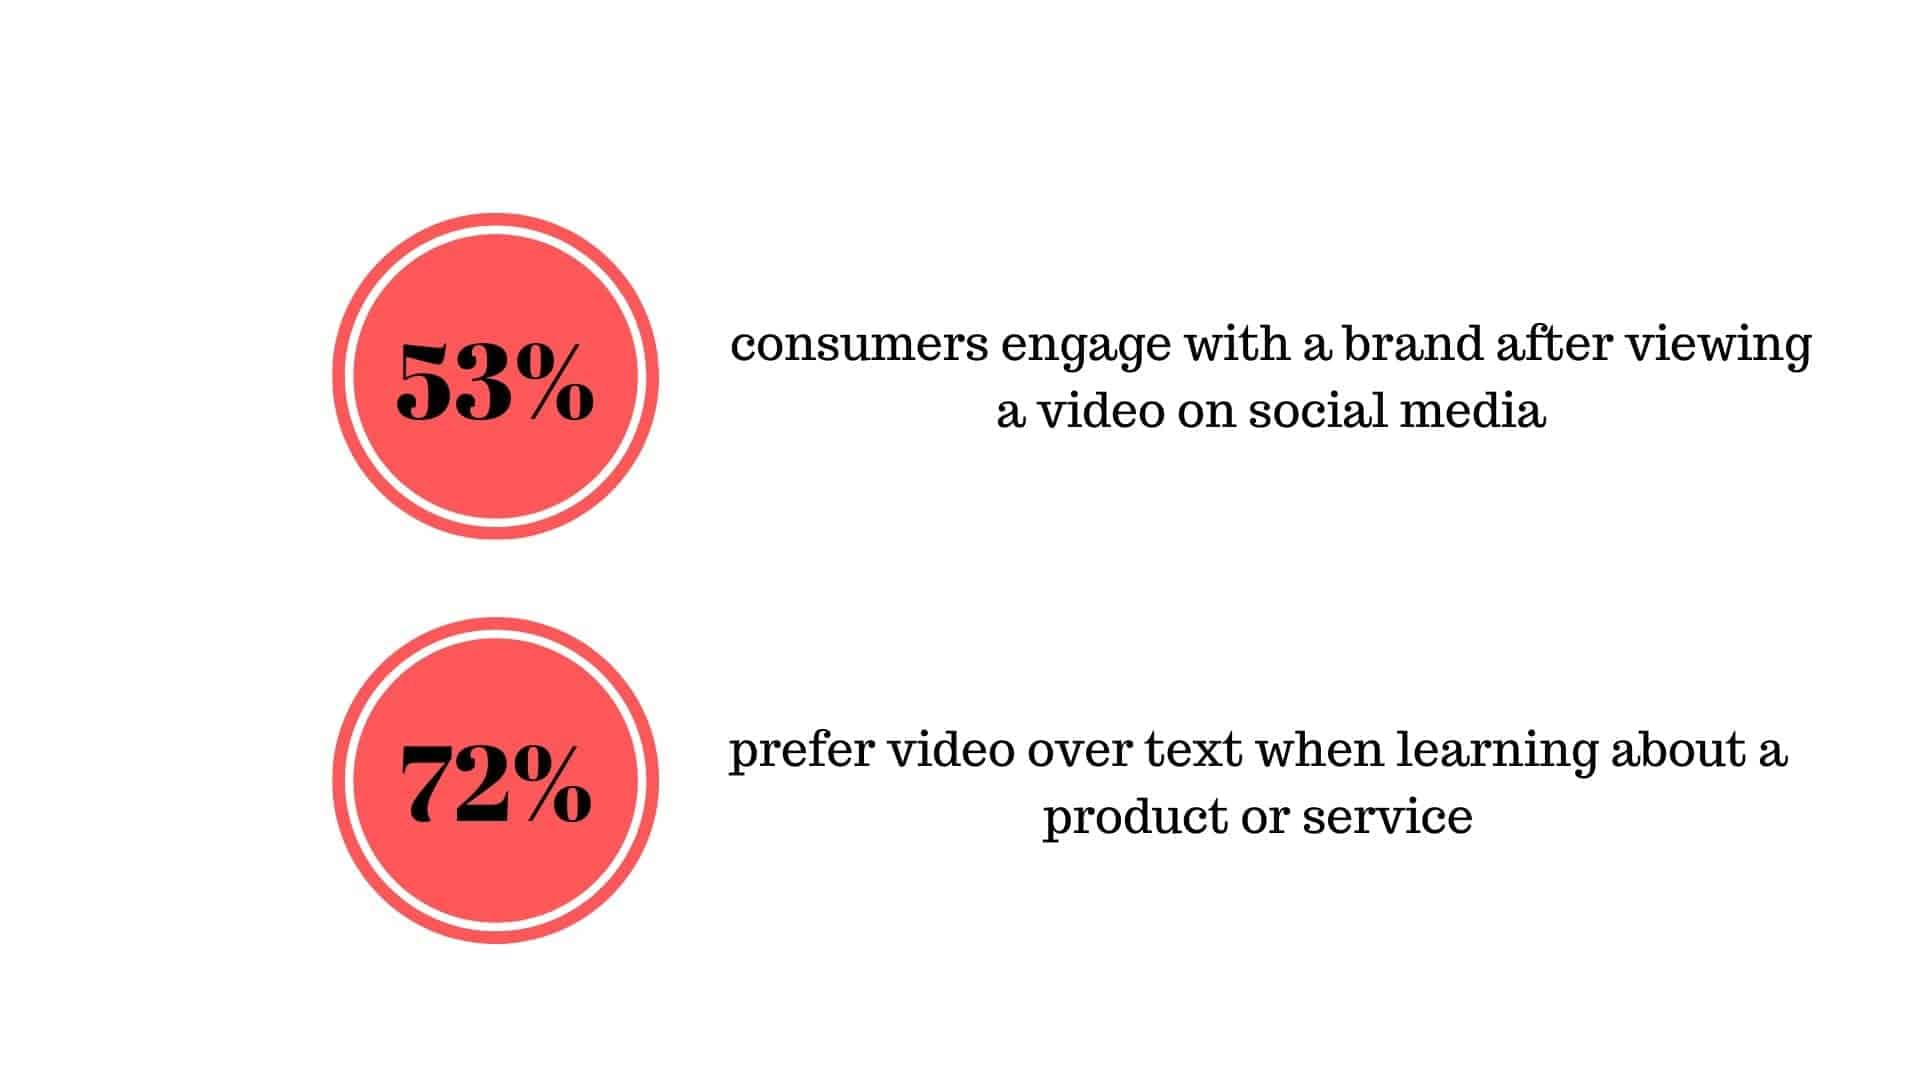 videos stats for digital marketing trend in 2020